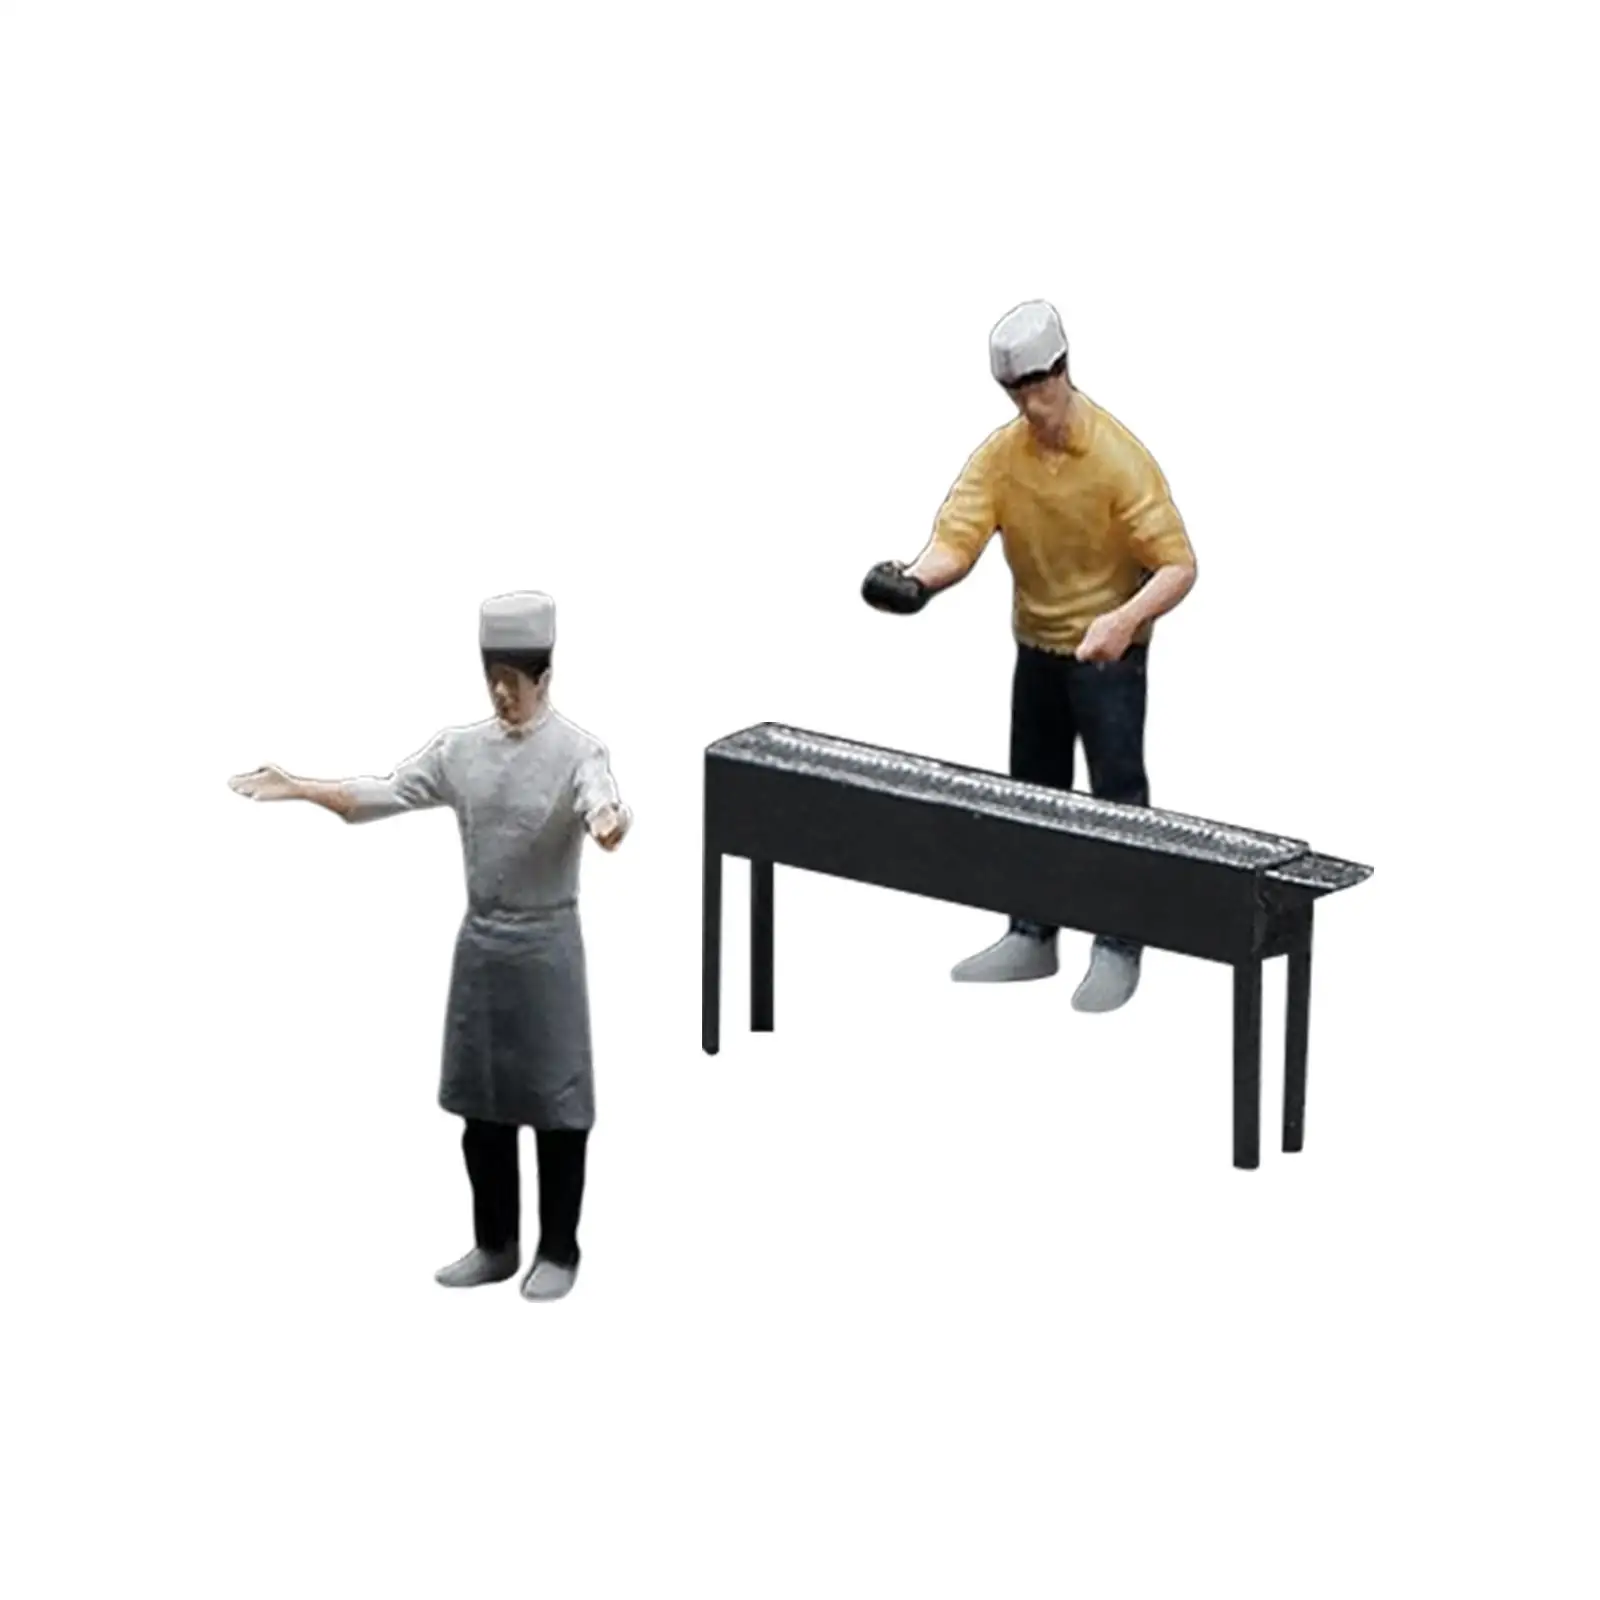 Resin 1:64 BBQ Chef Figure S Scale People Model Scene Miniature Dioramas Layout Movie Props Fairy Garden DIY Projects Ornaments